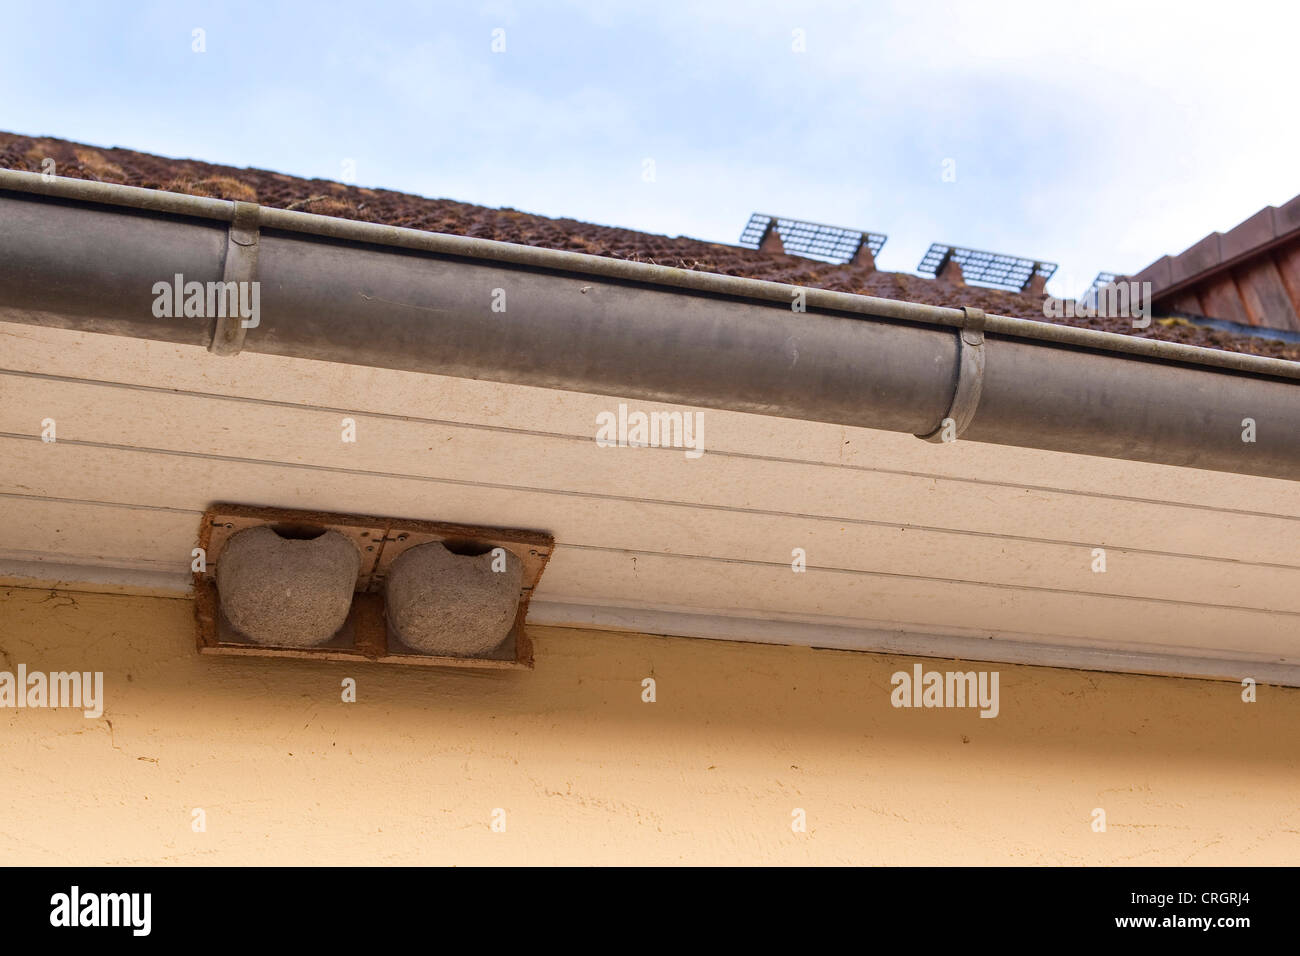 nestboxes for swallows; artifical nests for swallows at facade, Germany Stock Photo